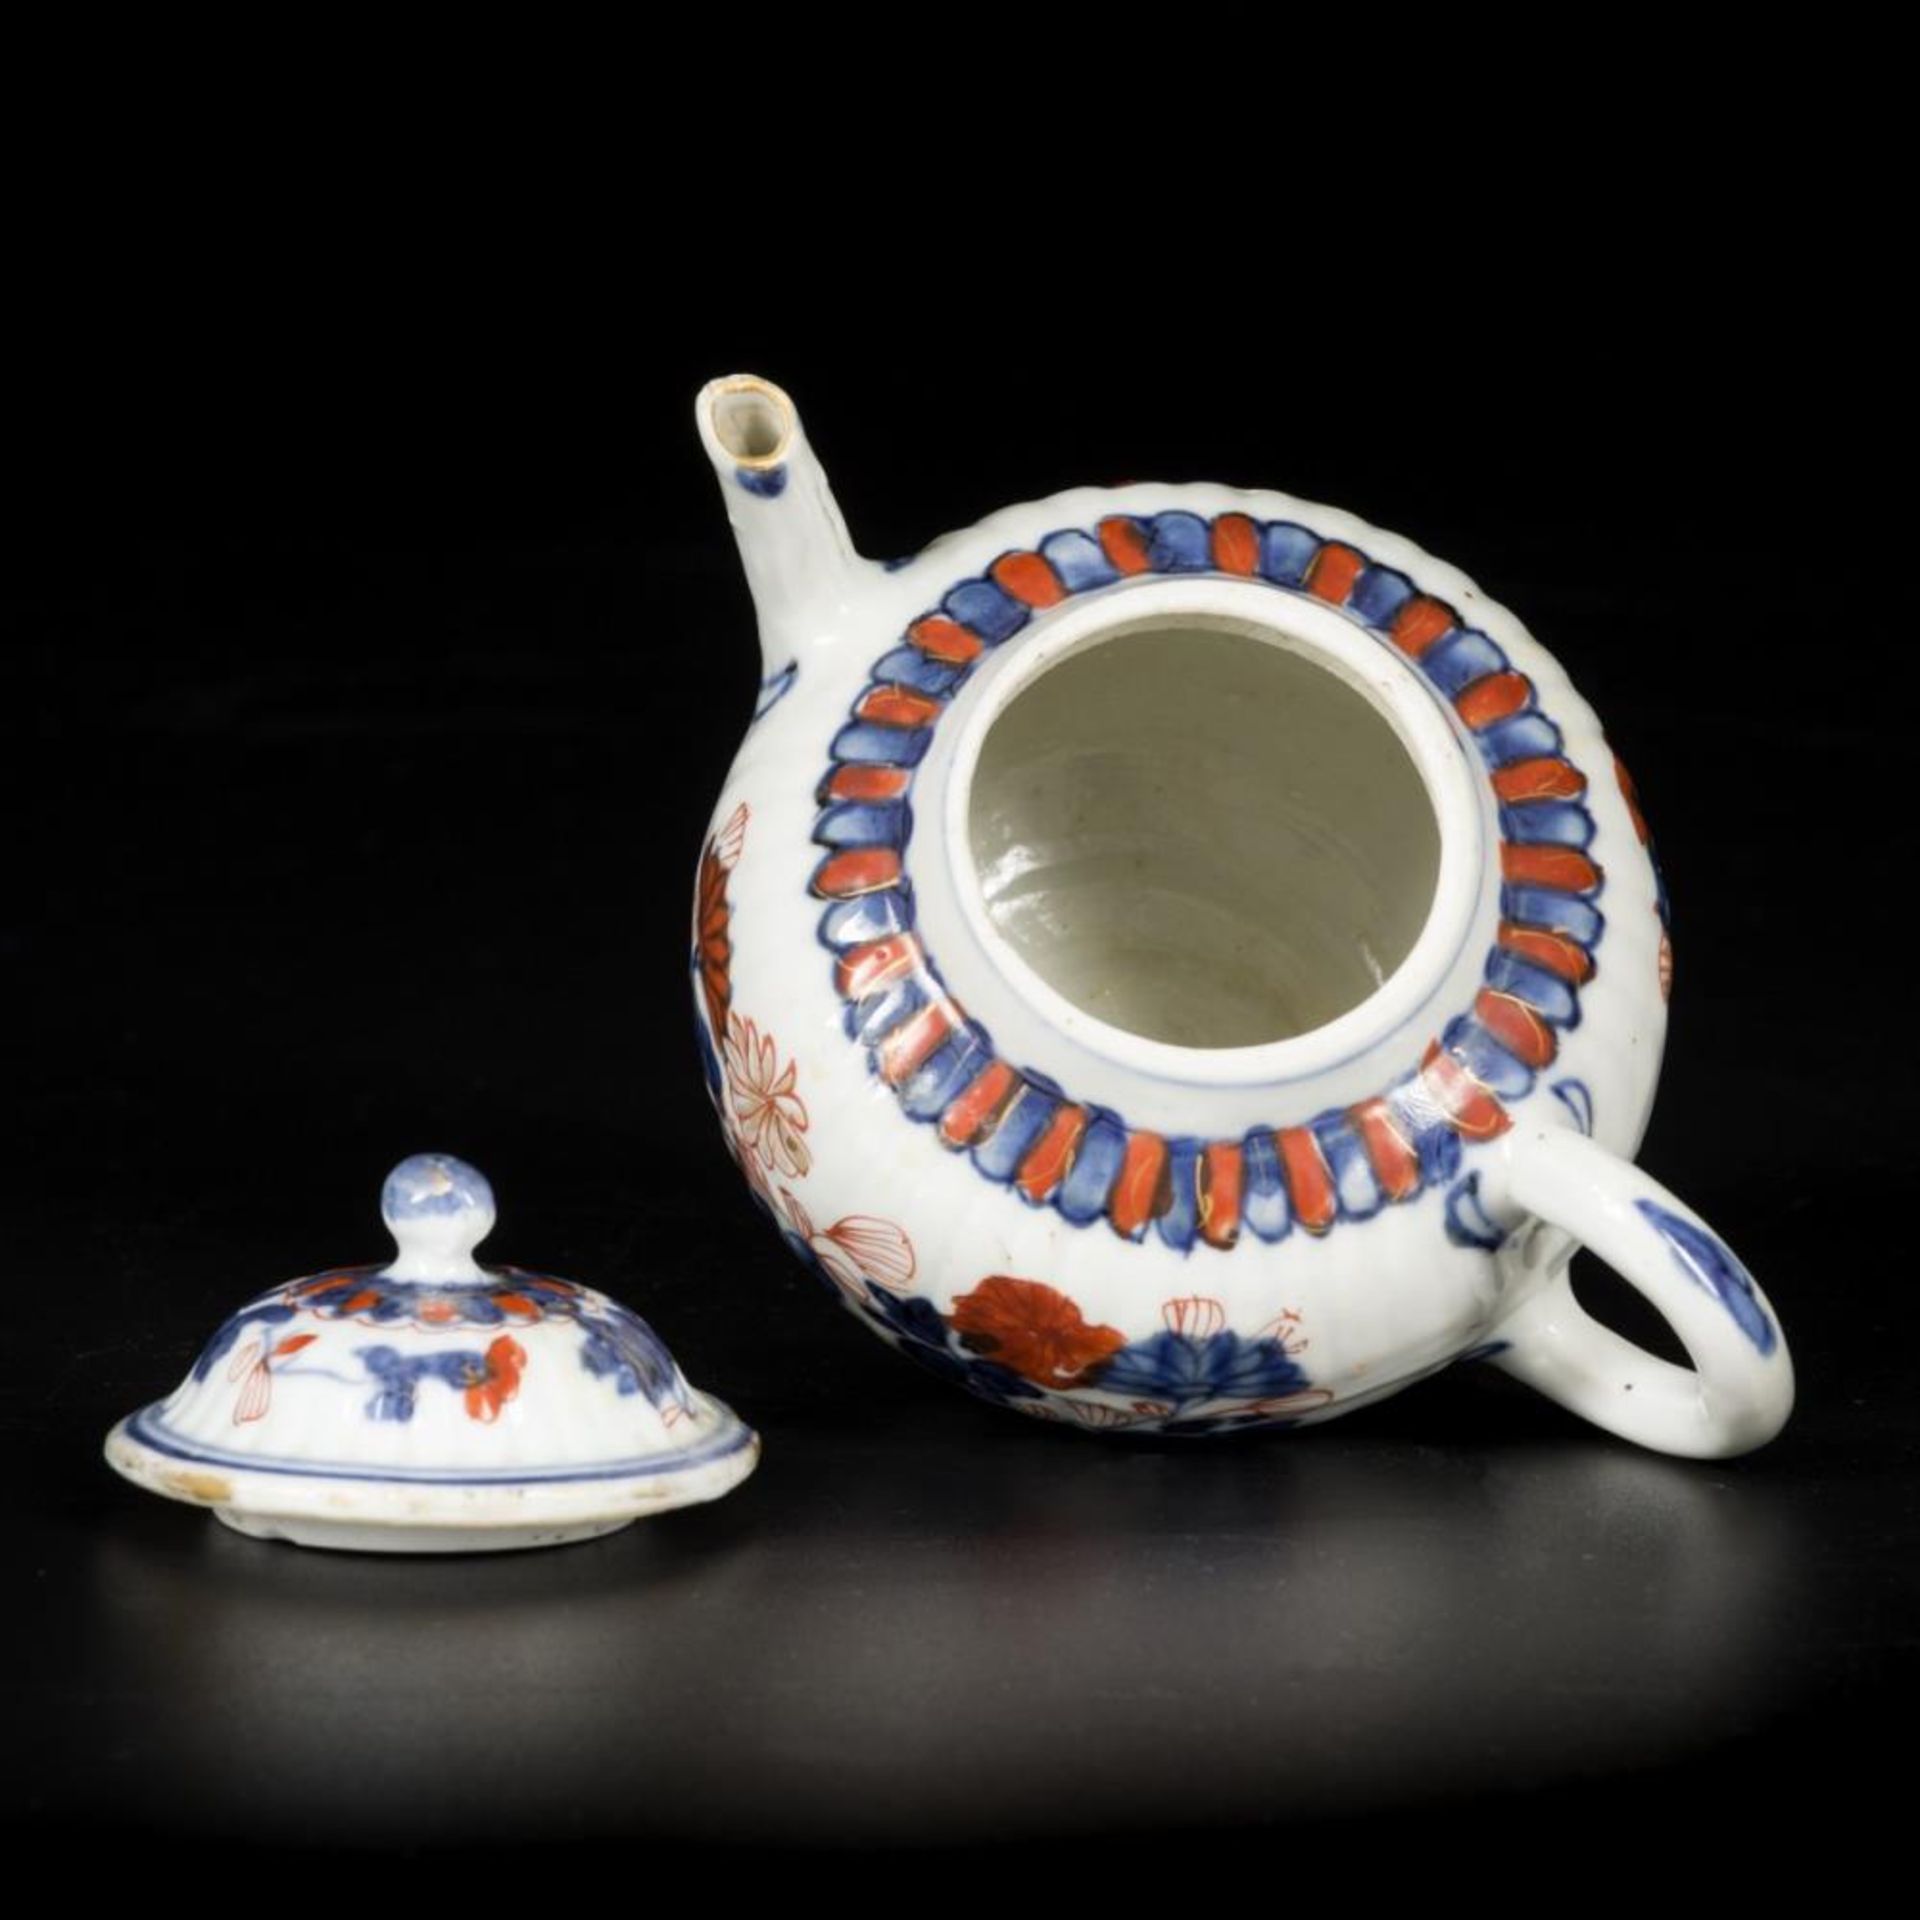 A porcelain Imari teapot with lid, China, 18th century. - Image 6 of 8